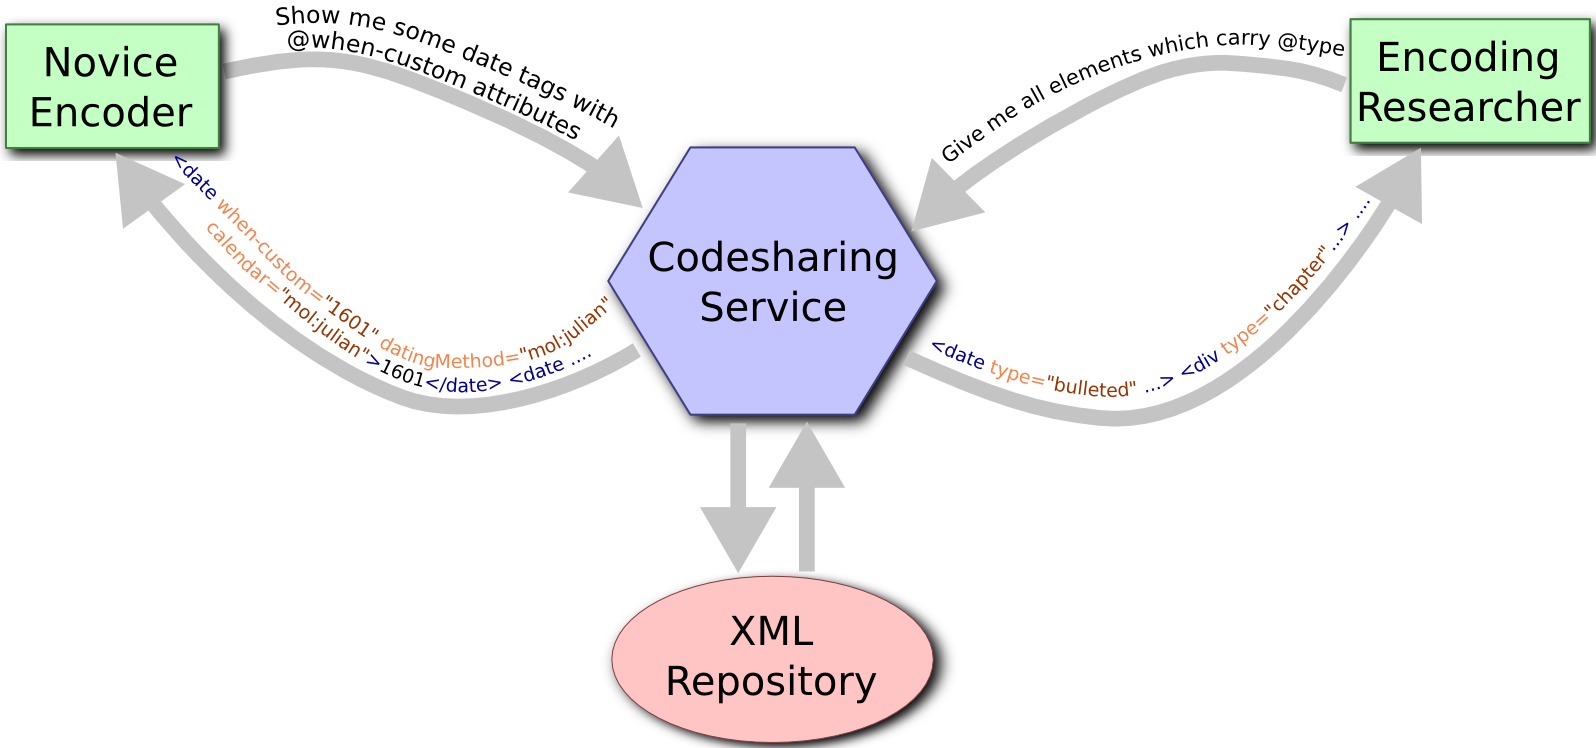 A CodeSharing service can serve the needs of novice encoders as well as encoding researchers.